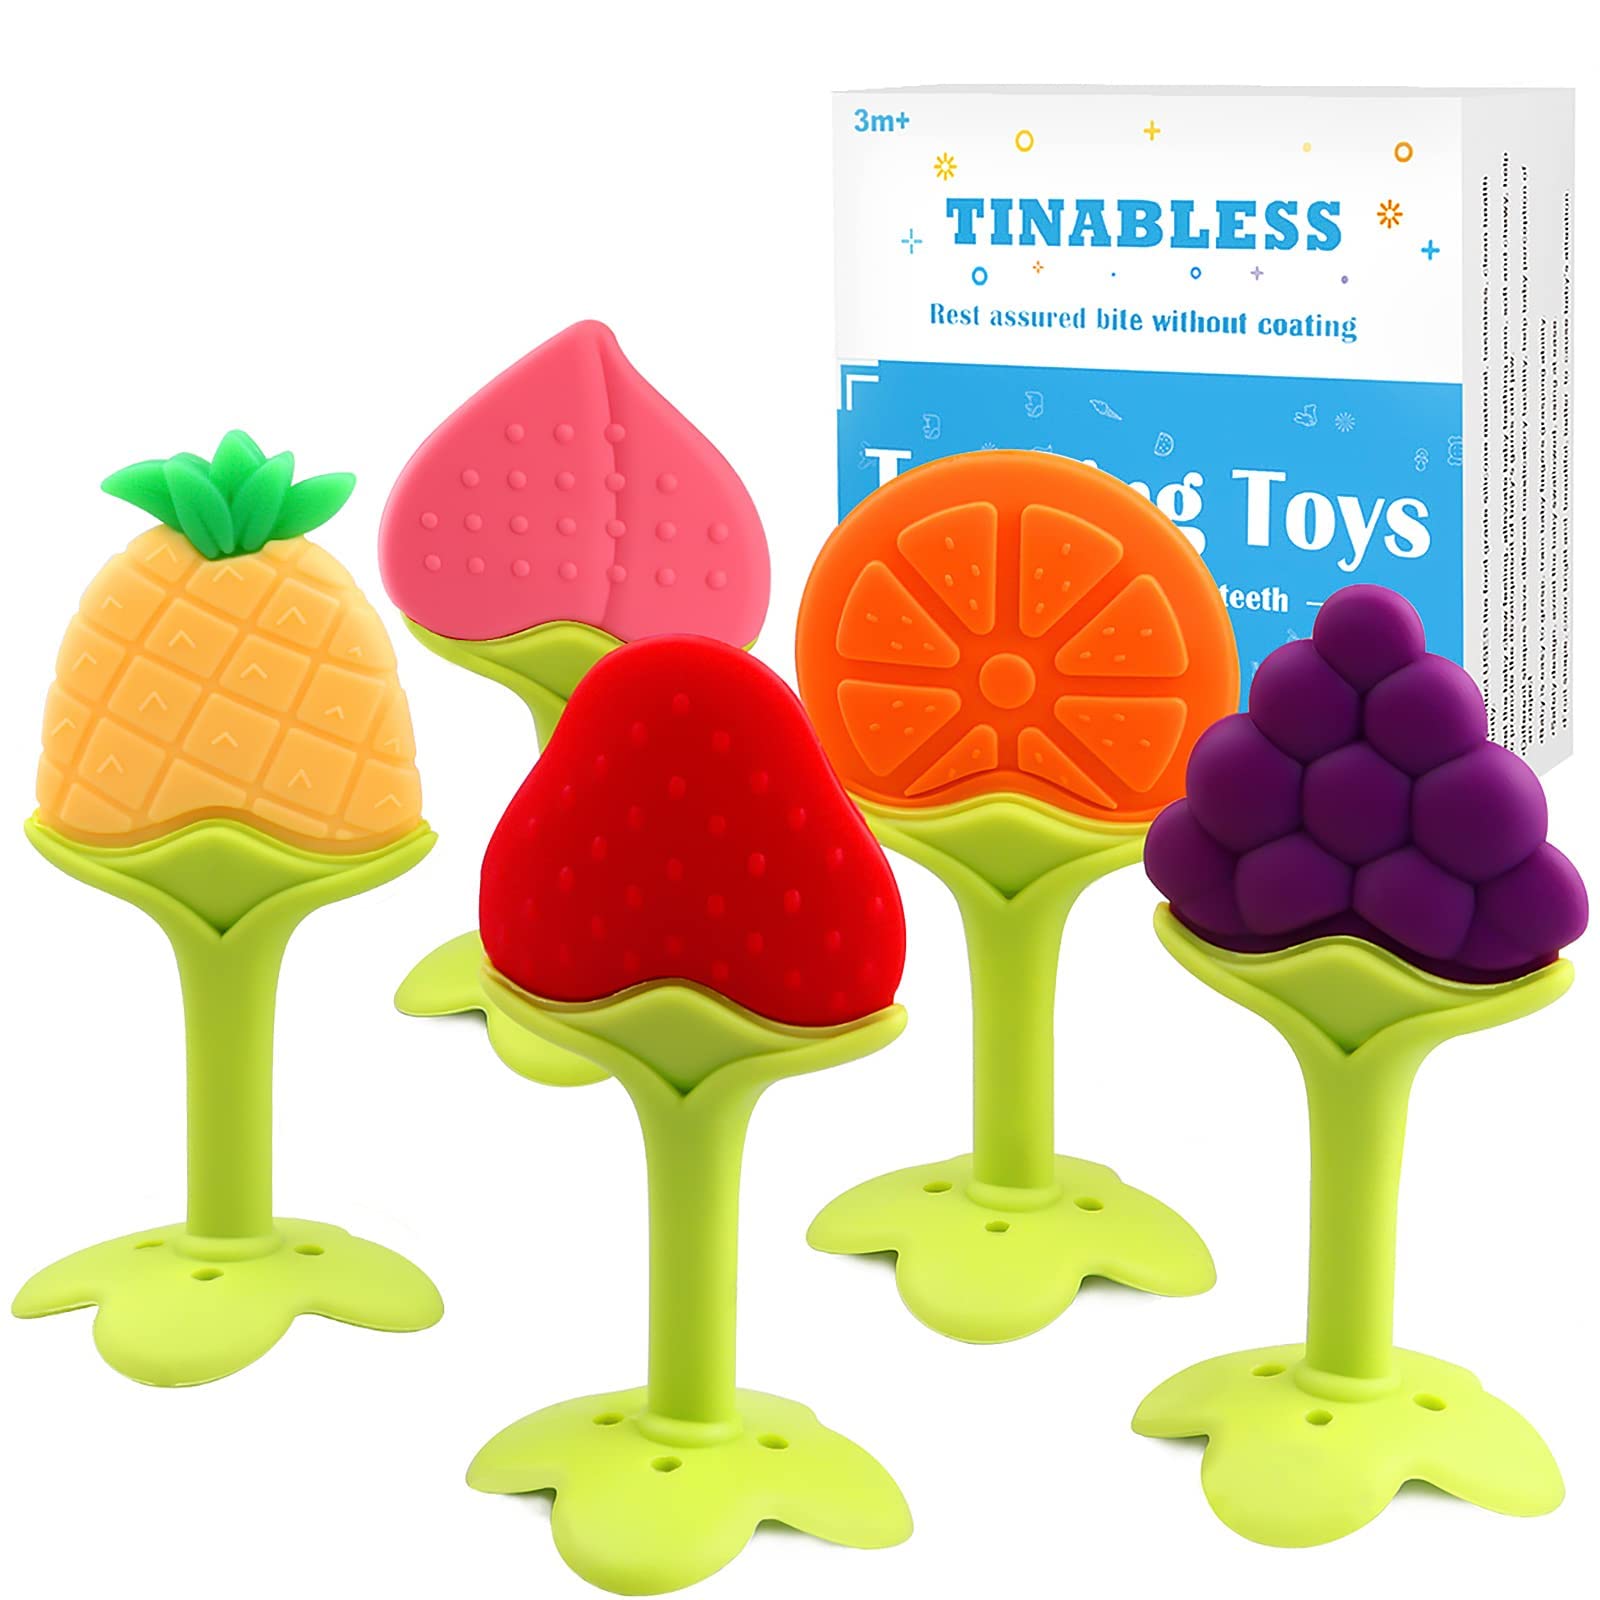 Book Cover Teething Toys (5 Pack) - Tinabless Infant Teething Keys Set, BPA-Free, Natural Organic Freezer Safe for Infants and Toddlers, Silicone Baby Teethers 5 Packs